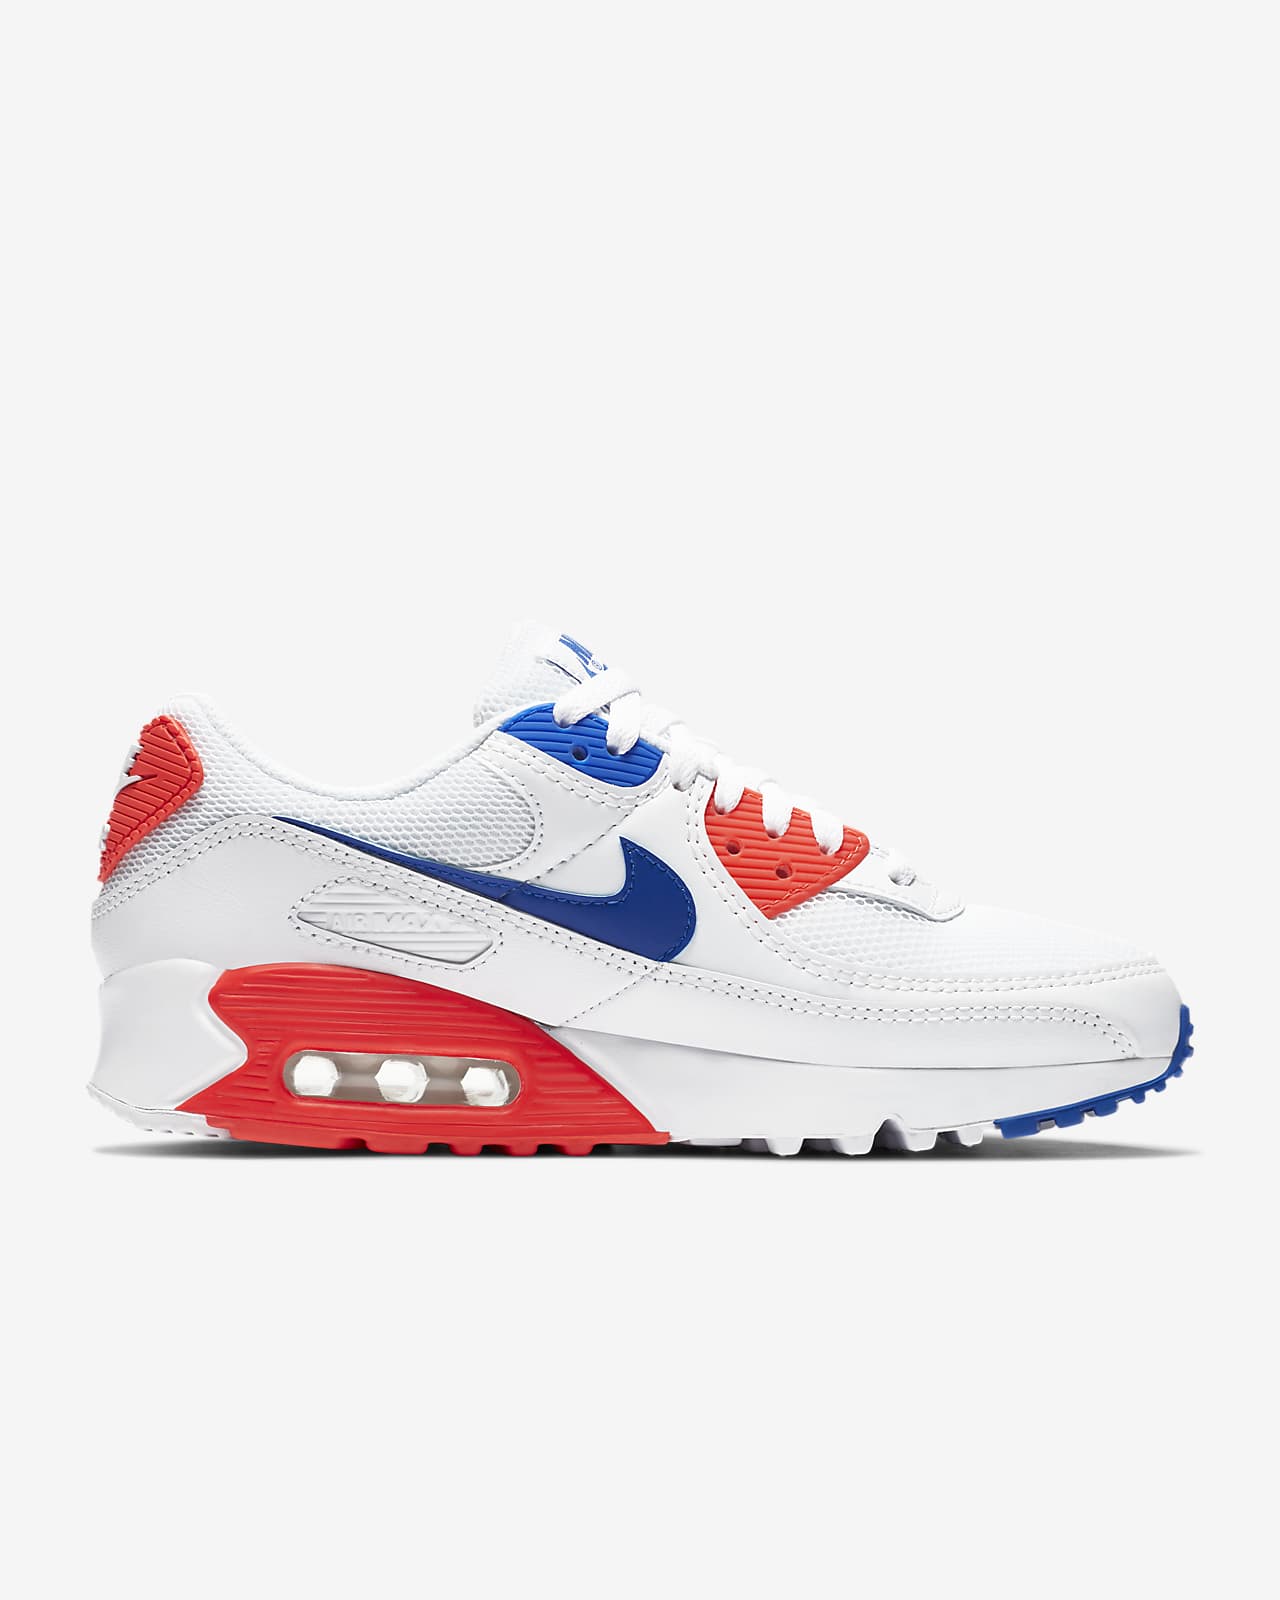 nike air max that change color with flash